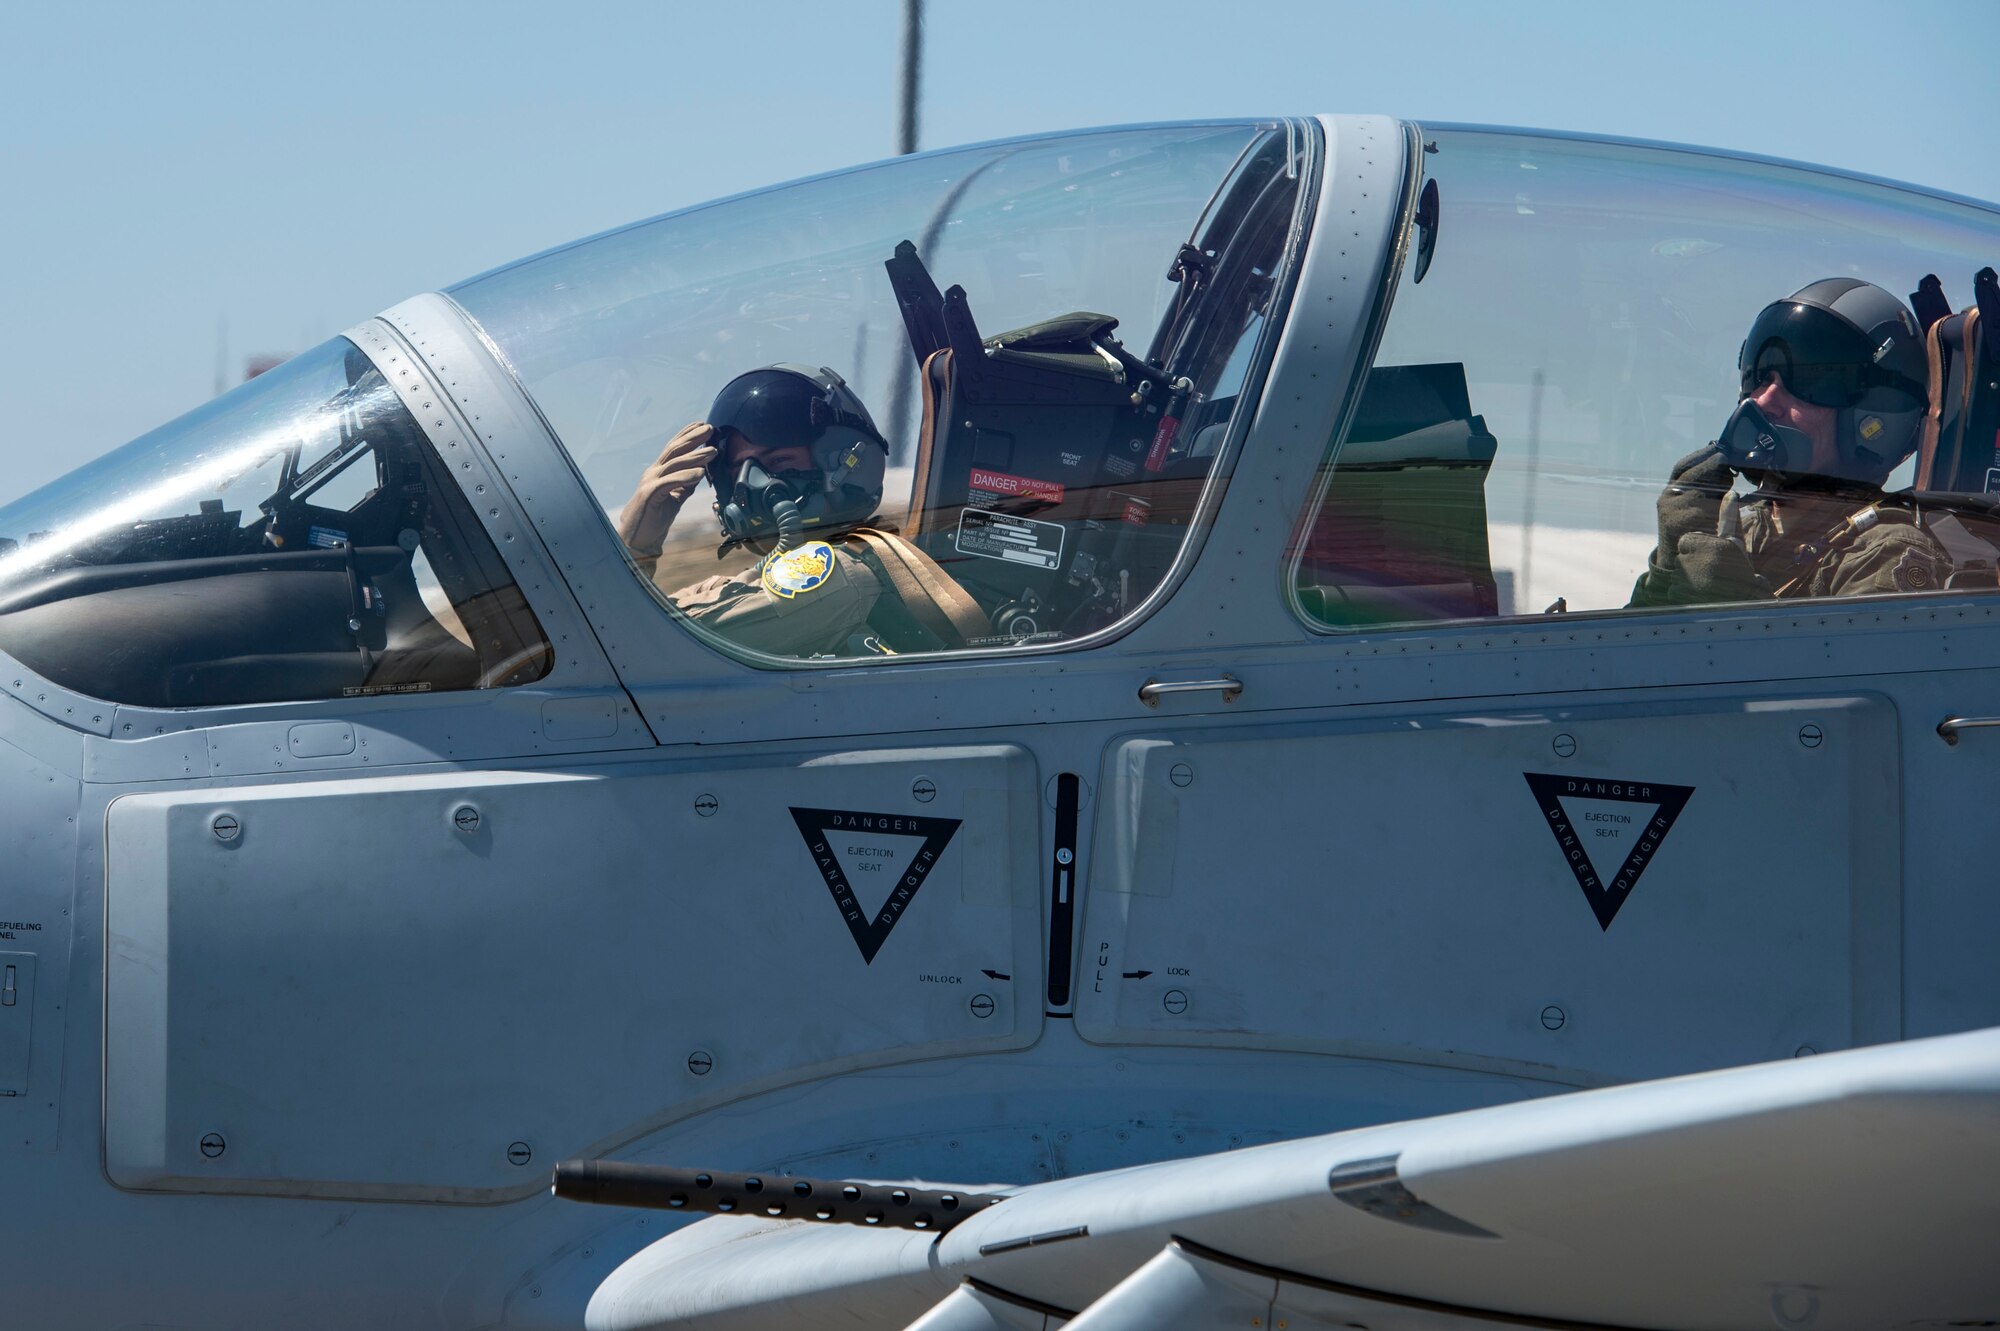 A Lebanese A-29 Super Tucano student pilot and a U.S. instructor pilot from the 81st Fighter Squadron, conduct the first “in-seat” training sortie, March 22, 2017, at Moody Air Force Base, Ga. The program began in March 2017 and is designed to ensure the Lebanon air force receives the support and training needed to safely and effectively employ the A-29 Aircraft. (U.S. Air Force photo by Tech. Sgt. Zachary Wolf)